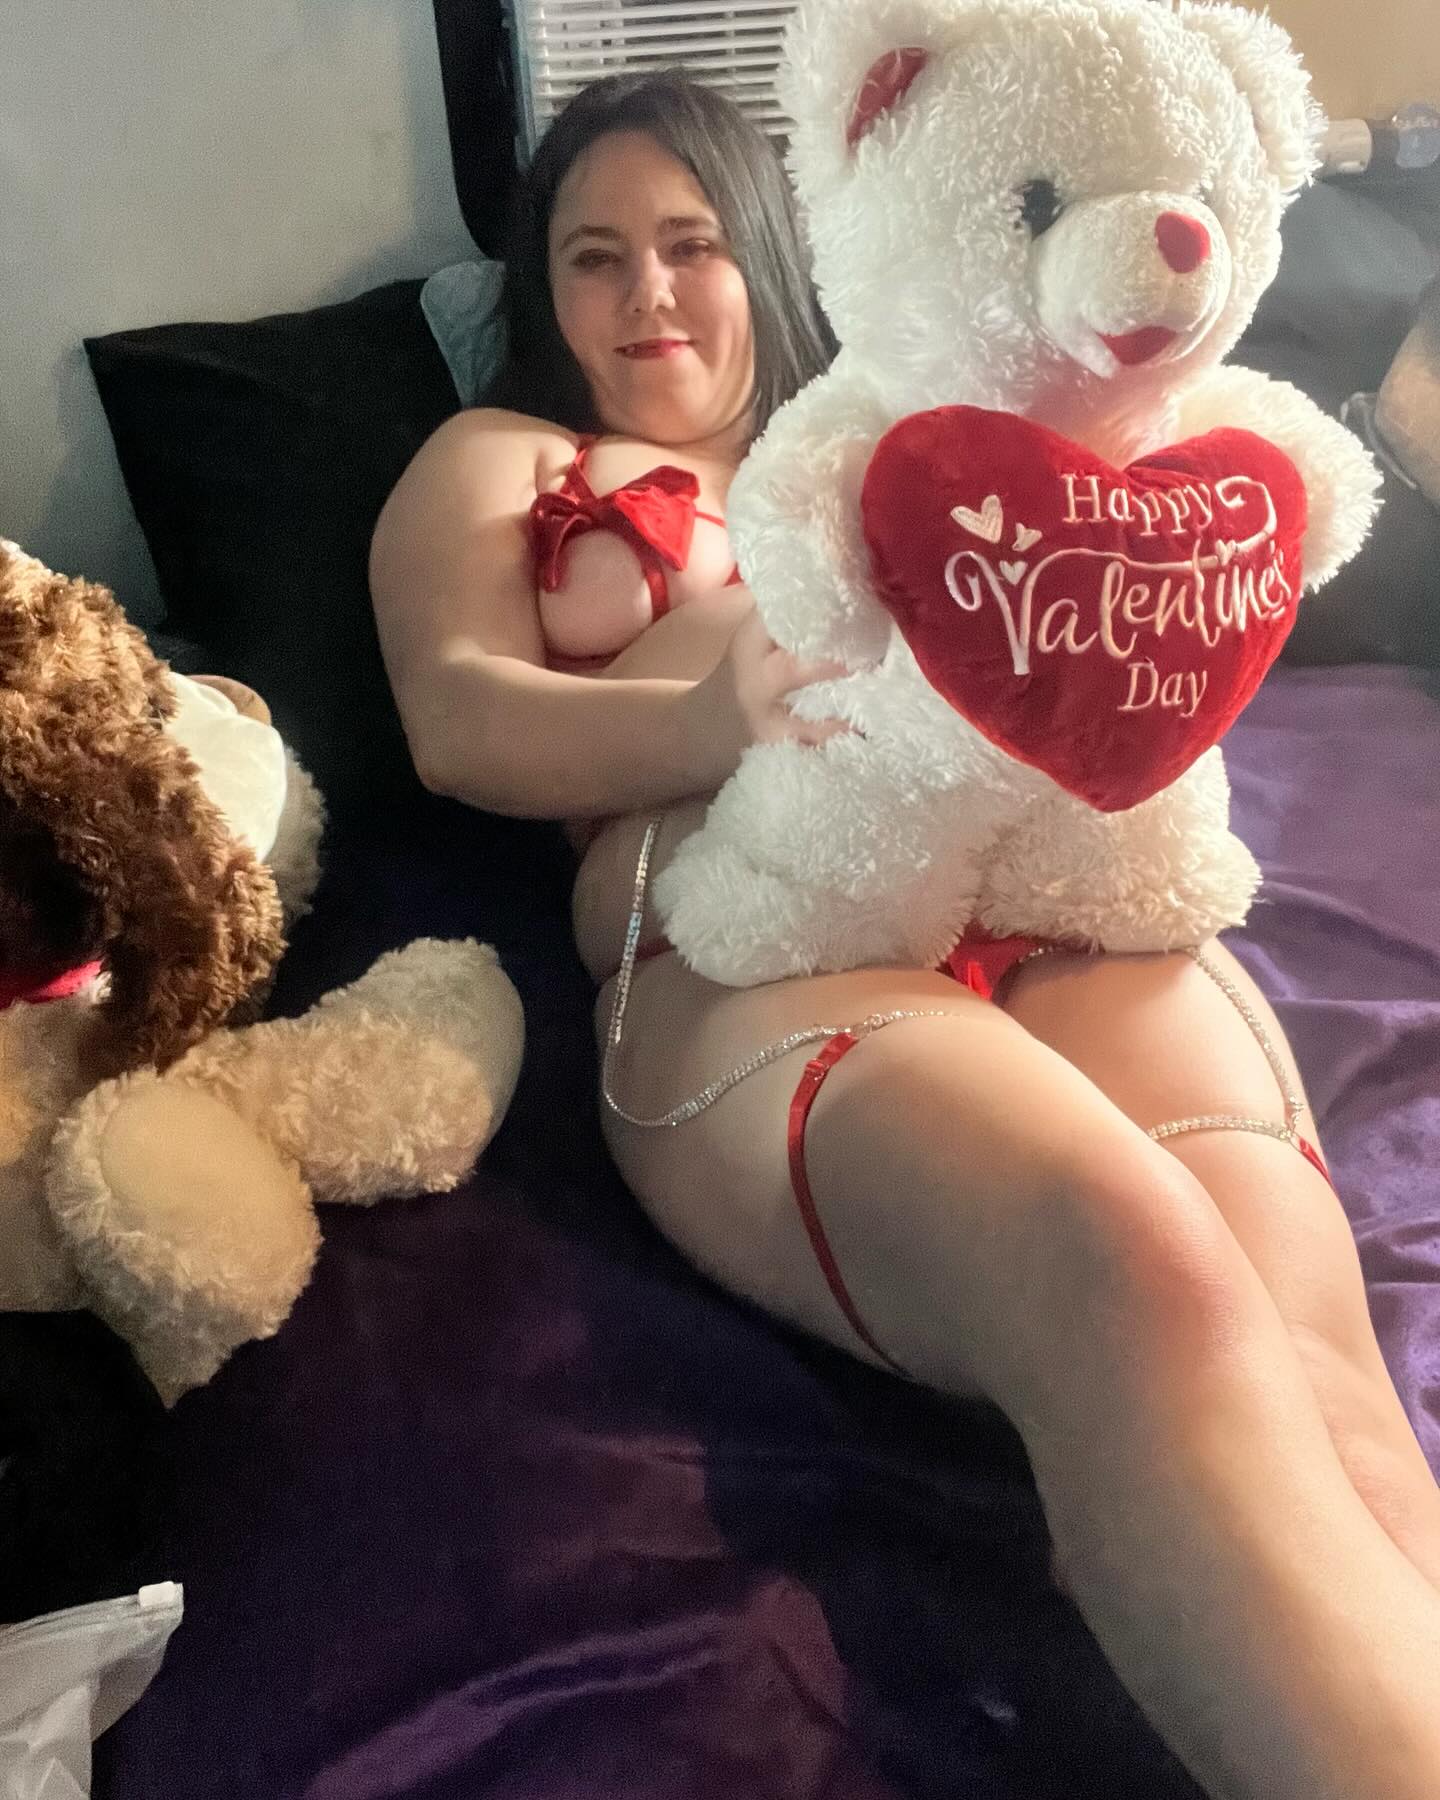 It was a wonderful Valentine’s Day. and a great valentines content day for me,happy Valentine’s Day from me to y’all! #onlyfans #love #sweet #beautiful #sexy #wonderfull #slushy.com #checkmeout #comment #follow #like #sharemearound #justletmeknow #happyvalentinesday2024